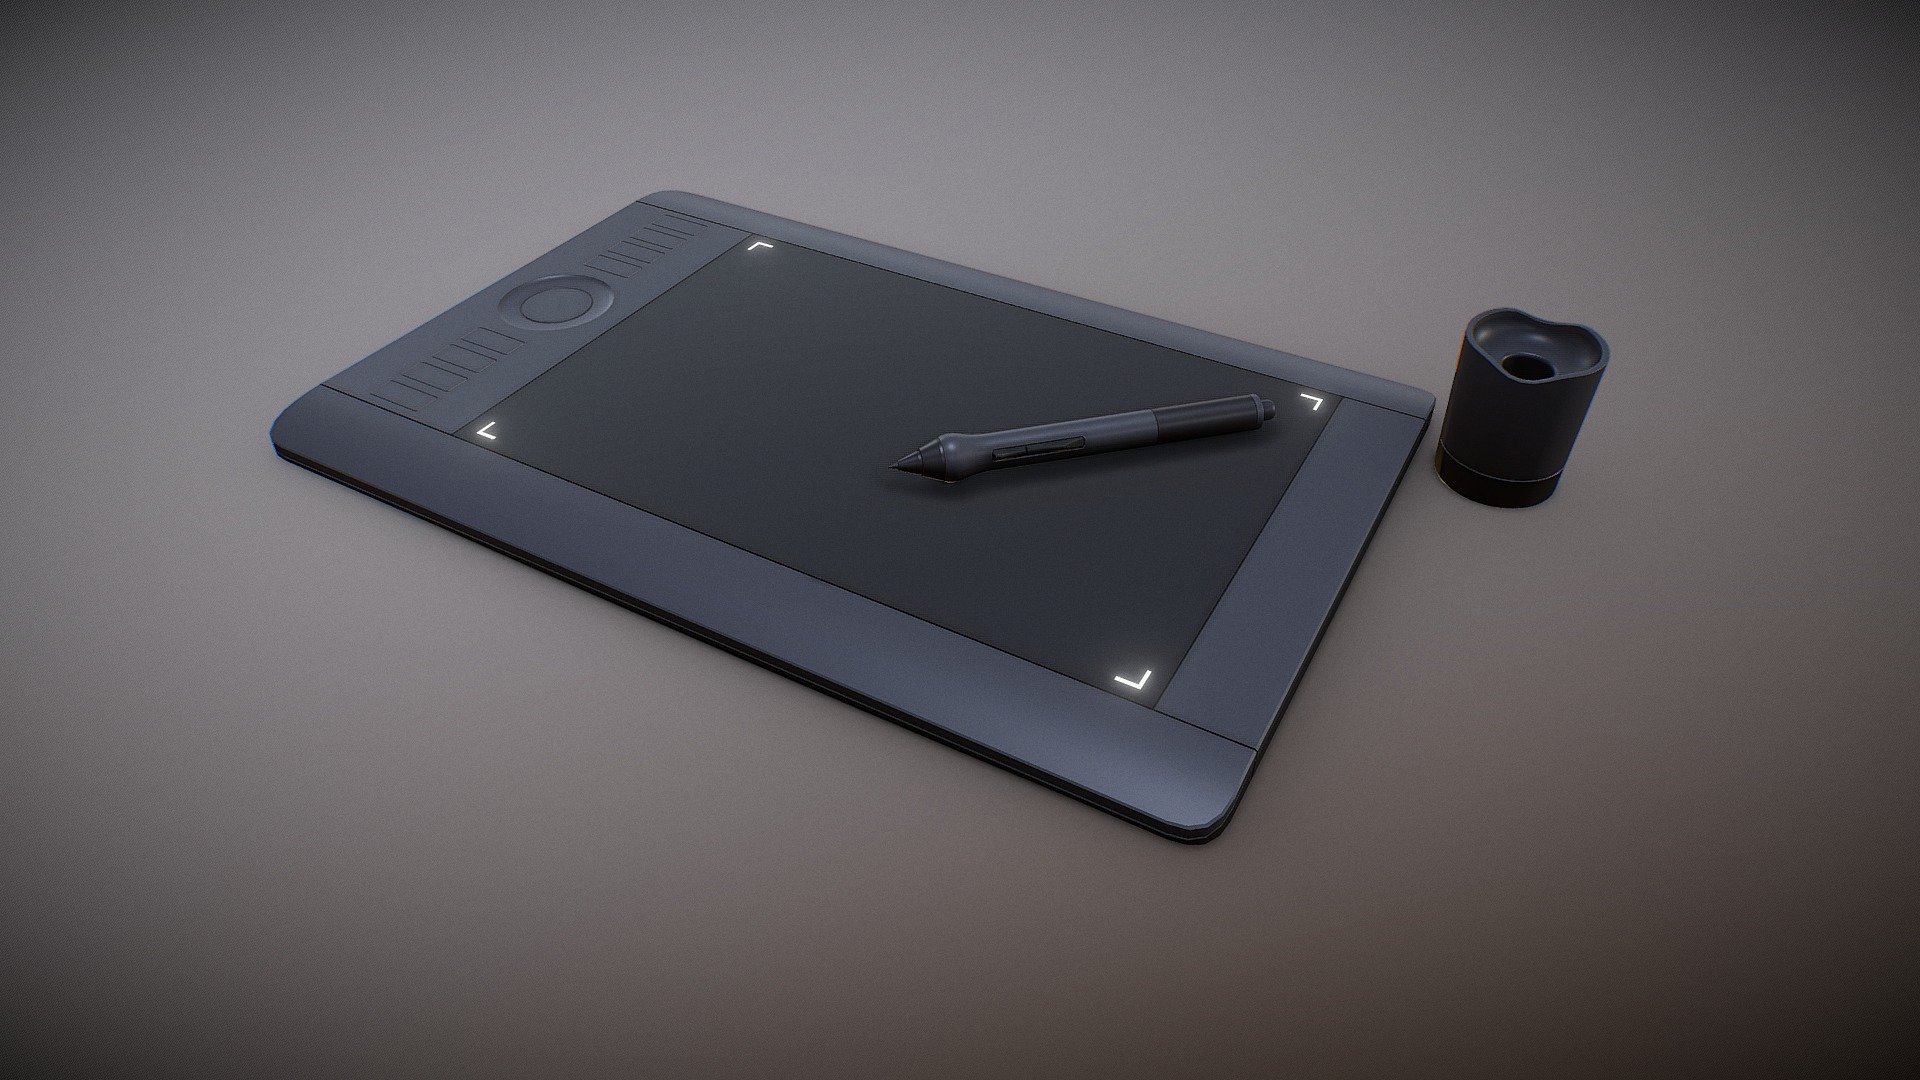 Drawing Tablet

There's no need to credit me

use &amp; distribute it as you like
for commercial or non comercial use.

cheers 3d model